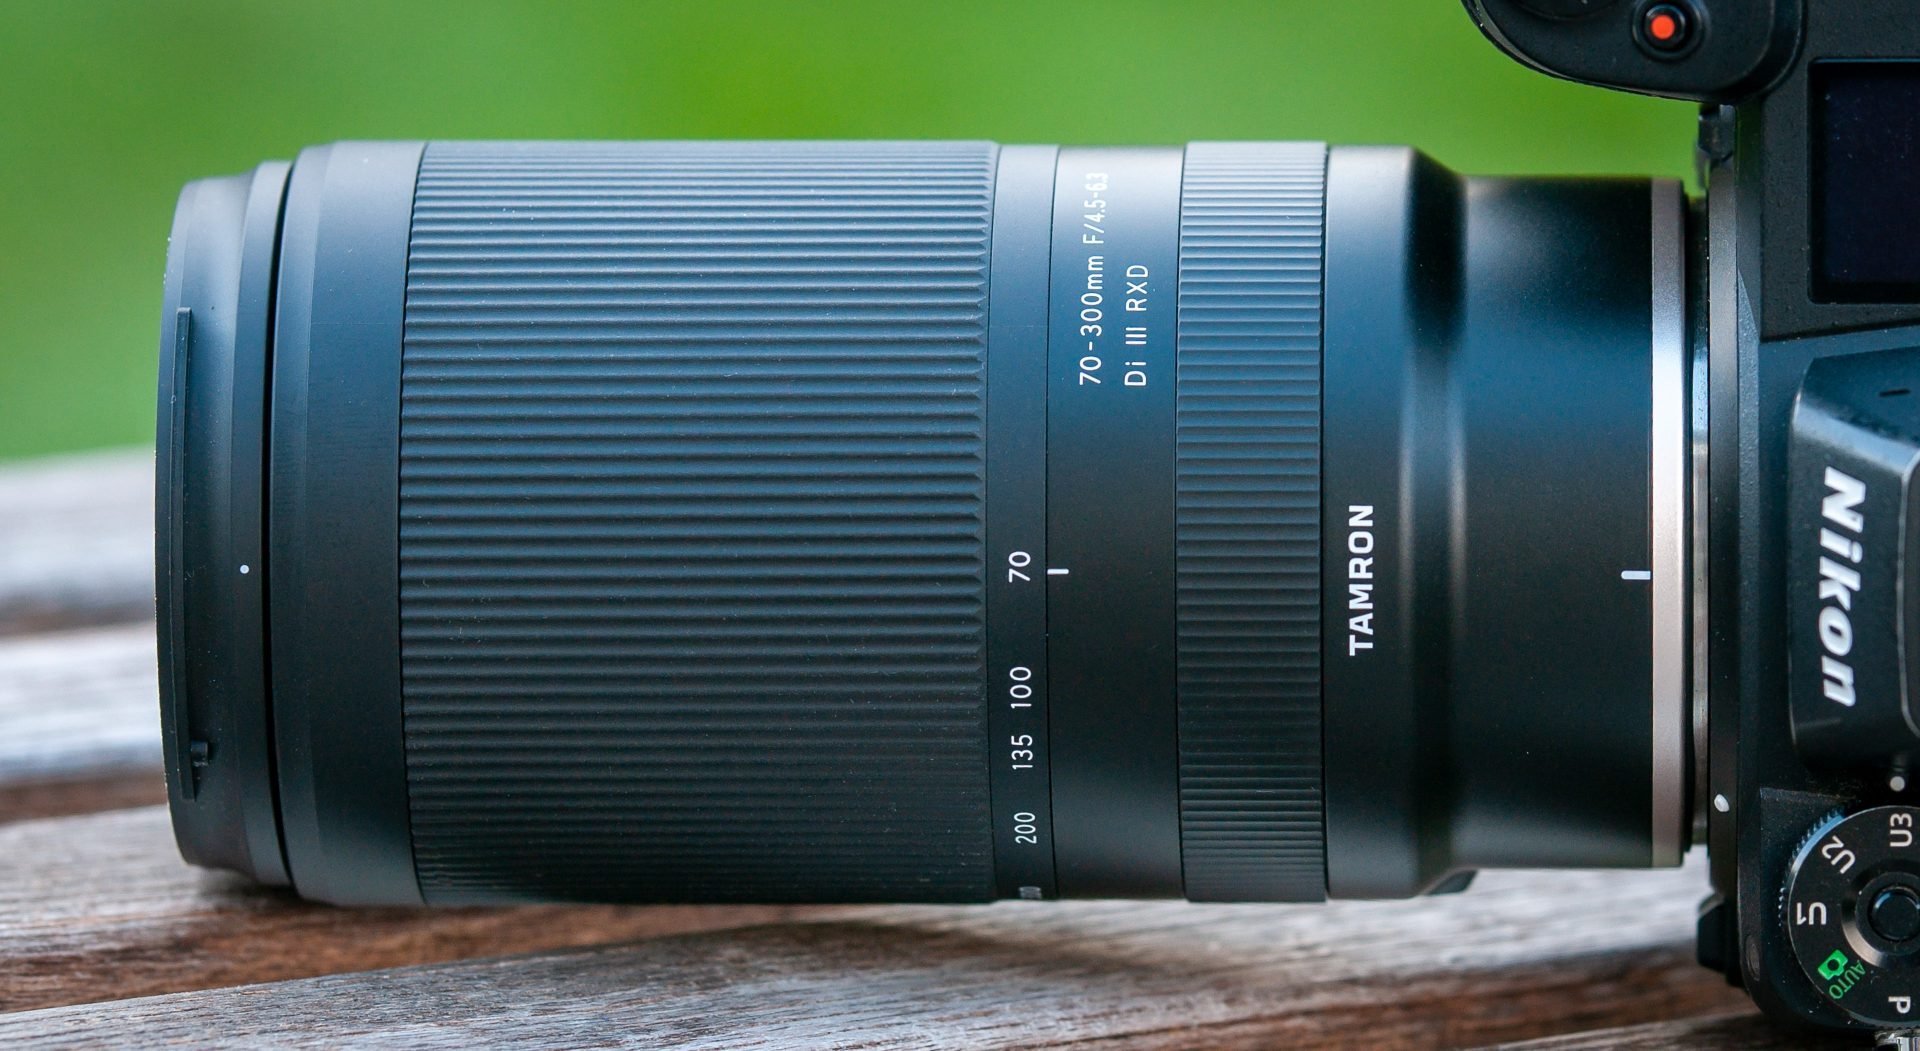 Tamron 70-300mm f/4.5-6.3 Di III RXD Full-Frame Lens for Sony E-Mount,  Black {67} A047 at KEH Camera